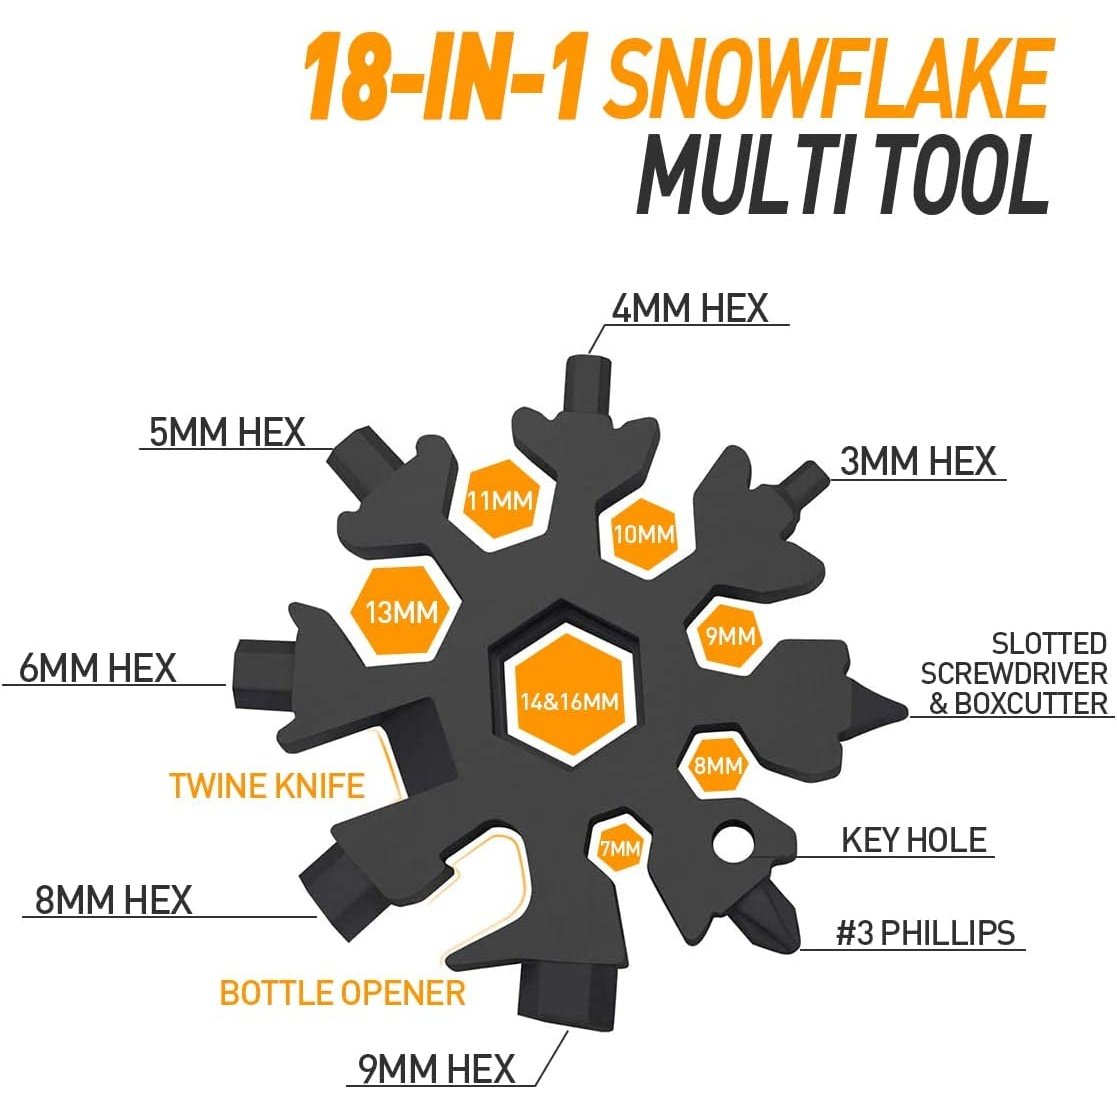 Gifts for Men, Stocking Fillers for Men/Women, 18-In-1 Snowflake Multi Tool Mens Gifts for Dad Gifts for Men Who Have Everything, Birthday Gifts for Him Gadgets for Men, Mens Gifts for Christmas